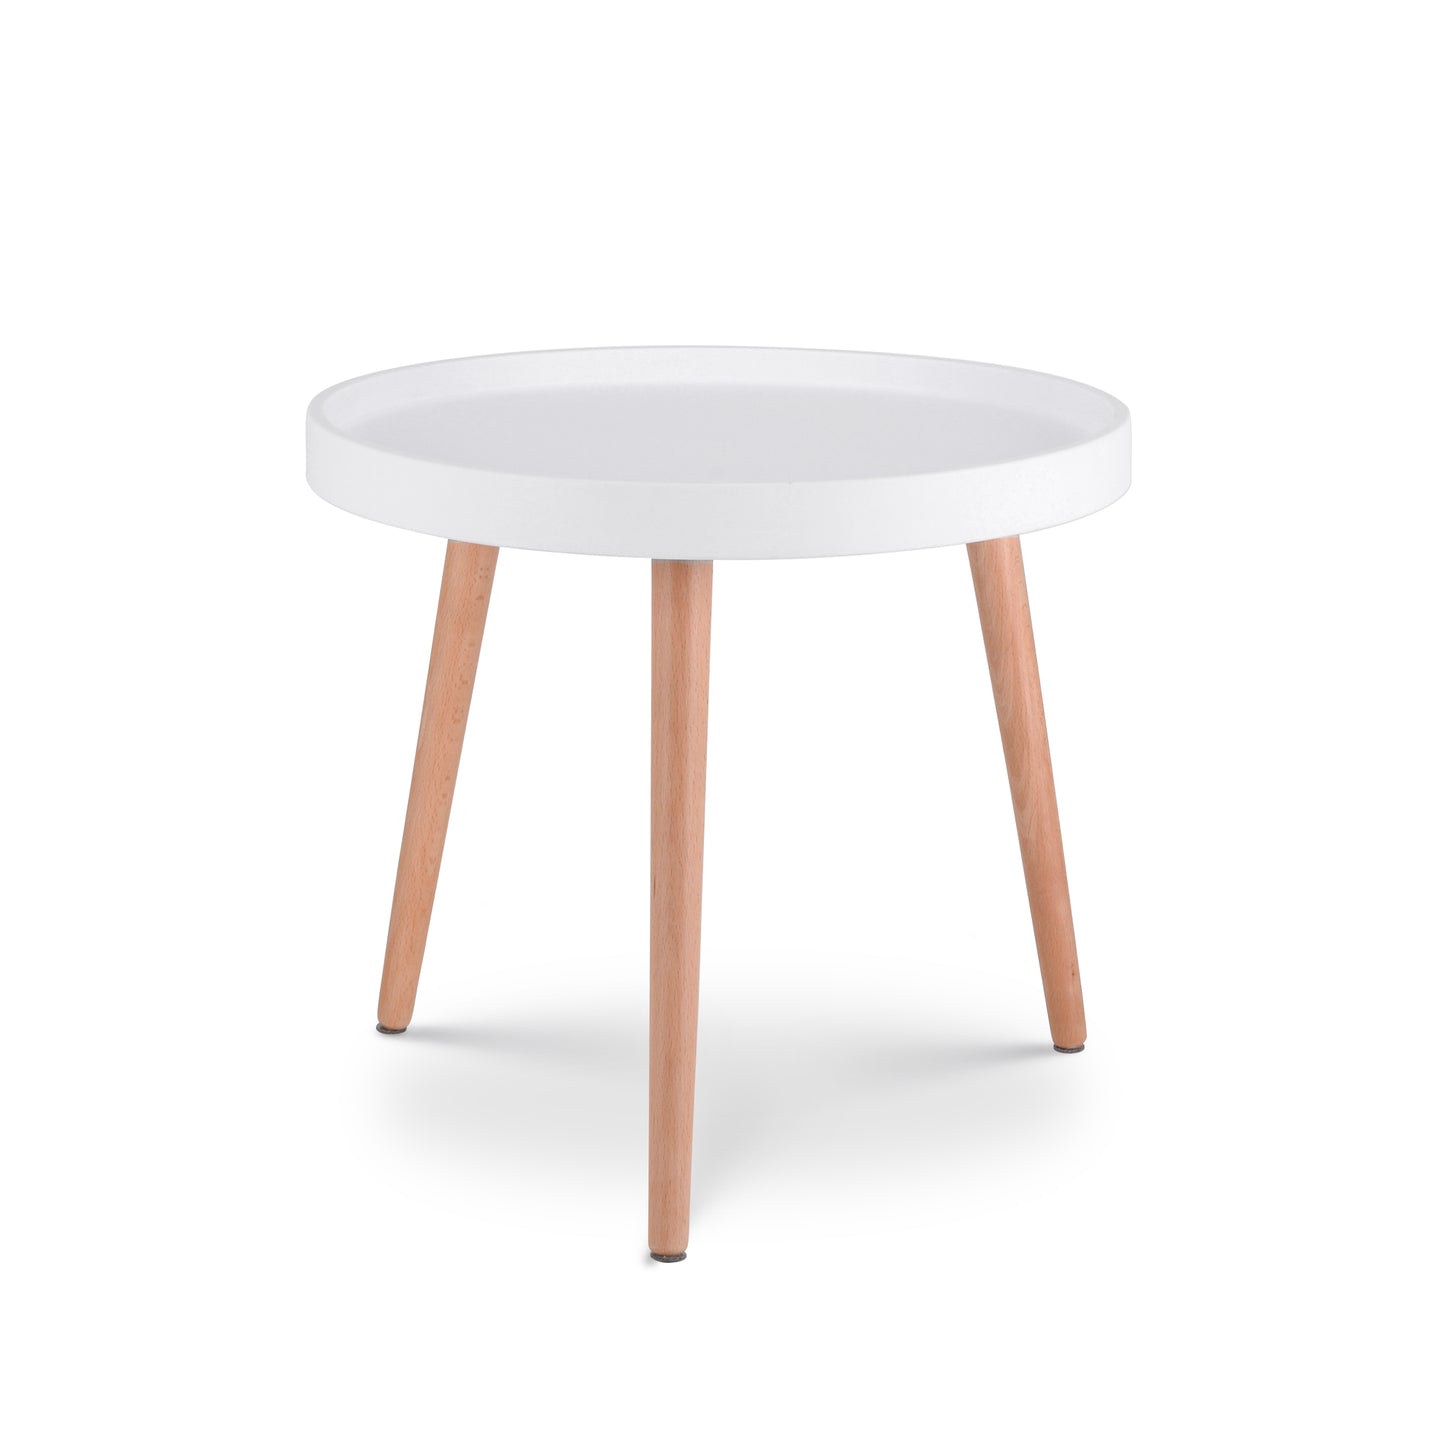 Table basse ronde JOANA couleur blanche style scandinave